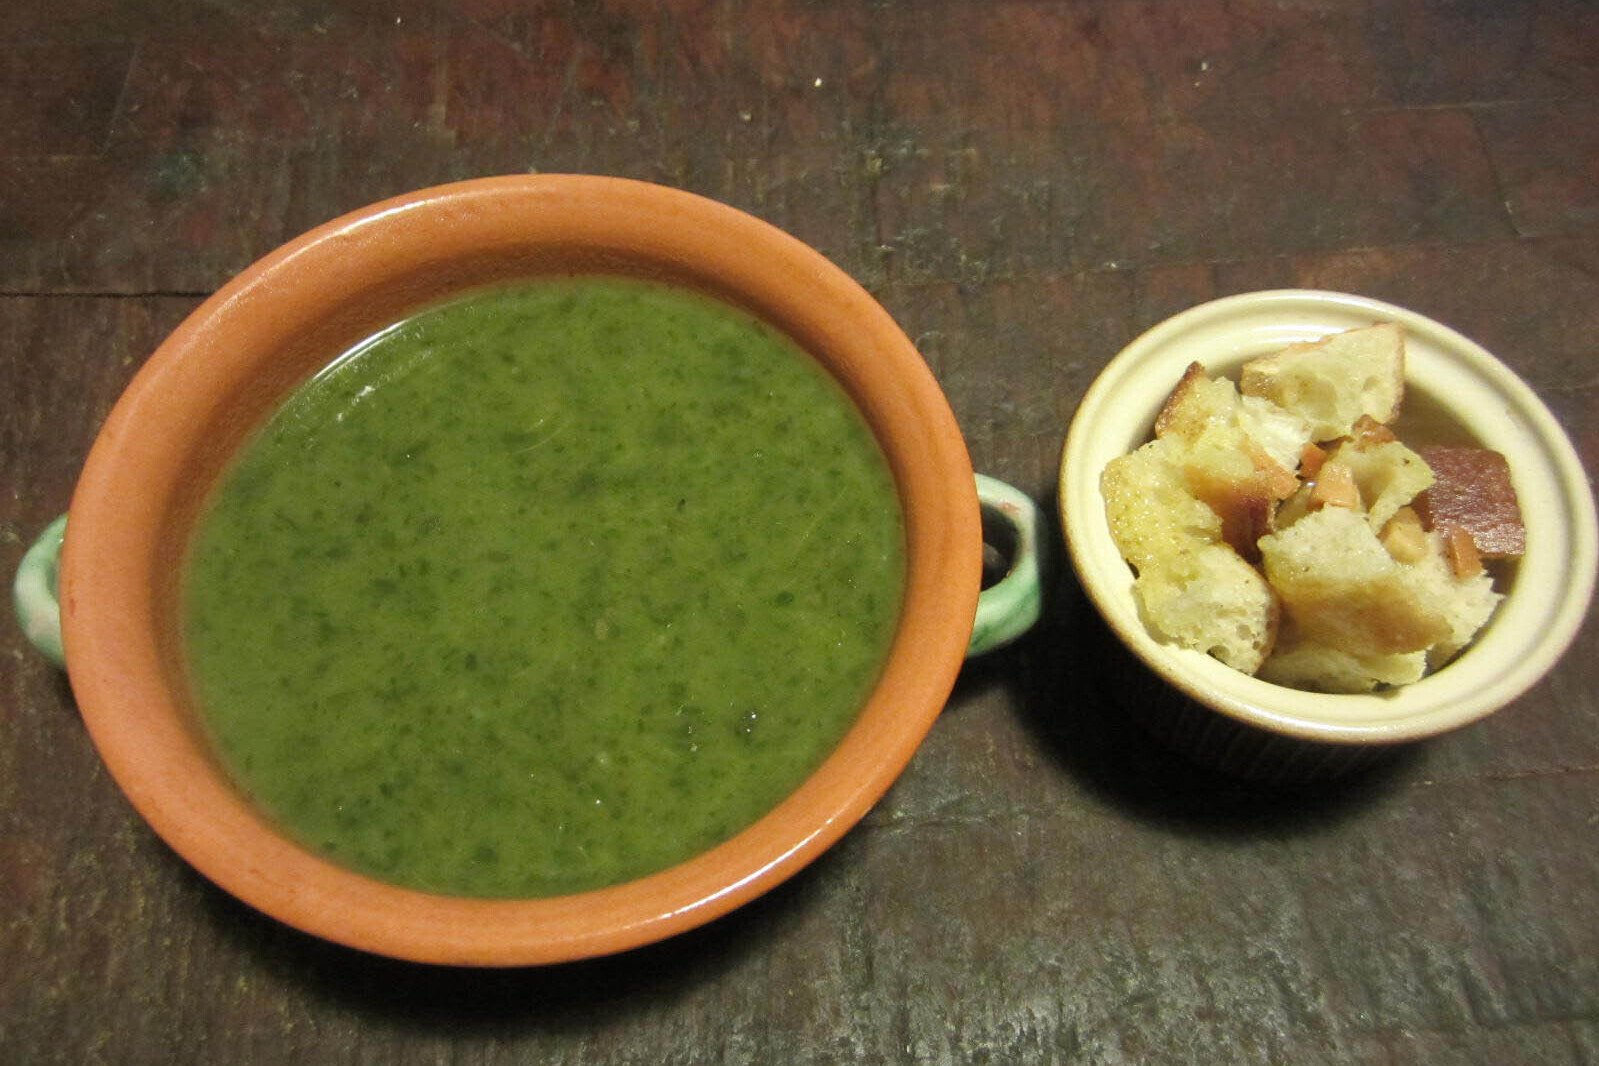 Bowl of leafy greens soup with garlic croutons on the side